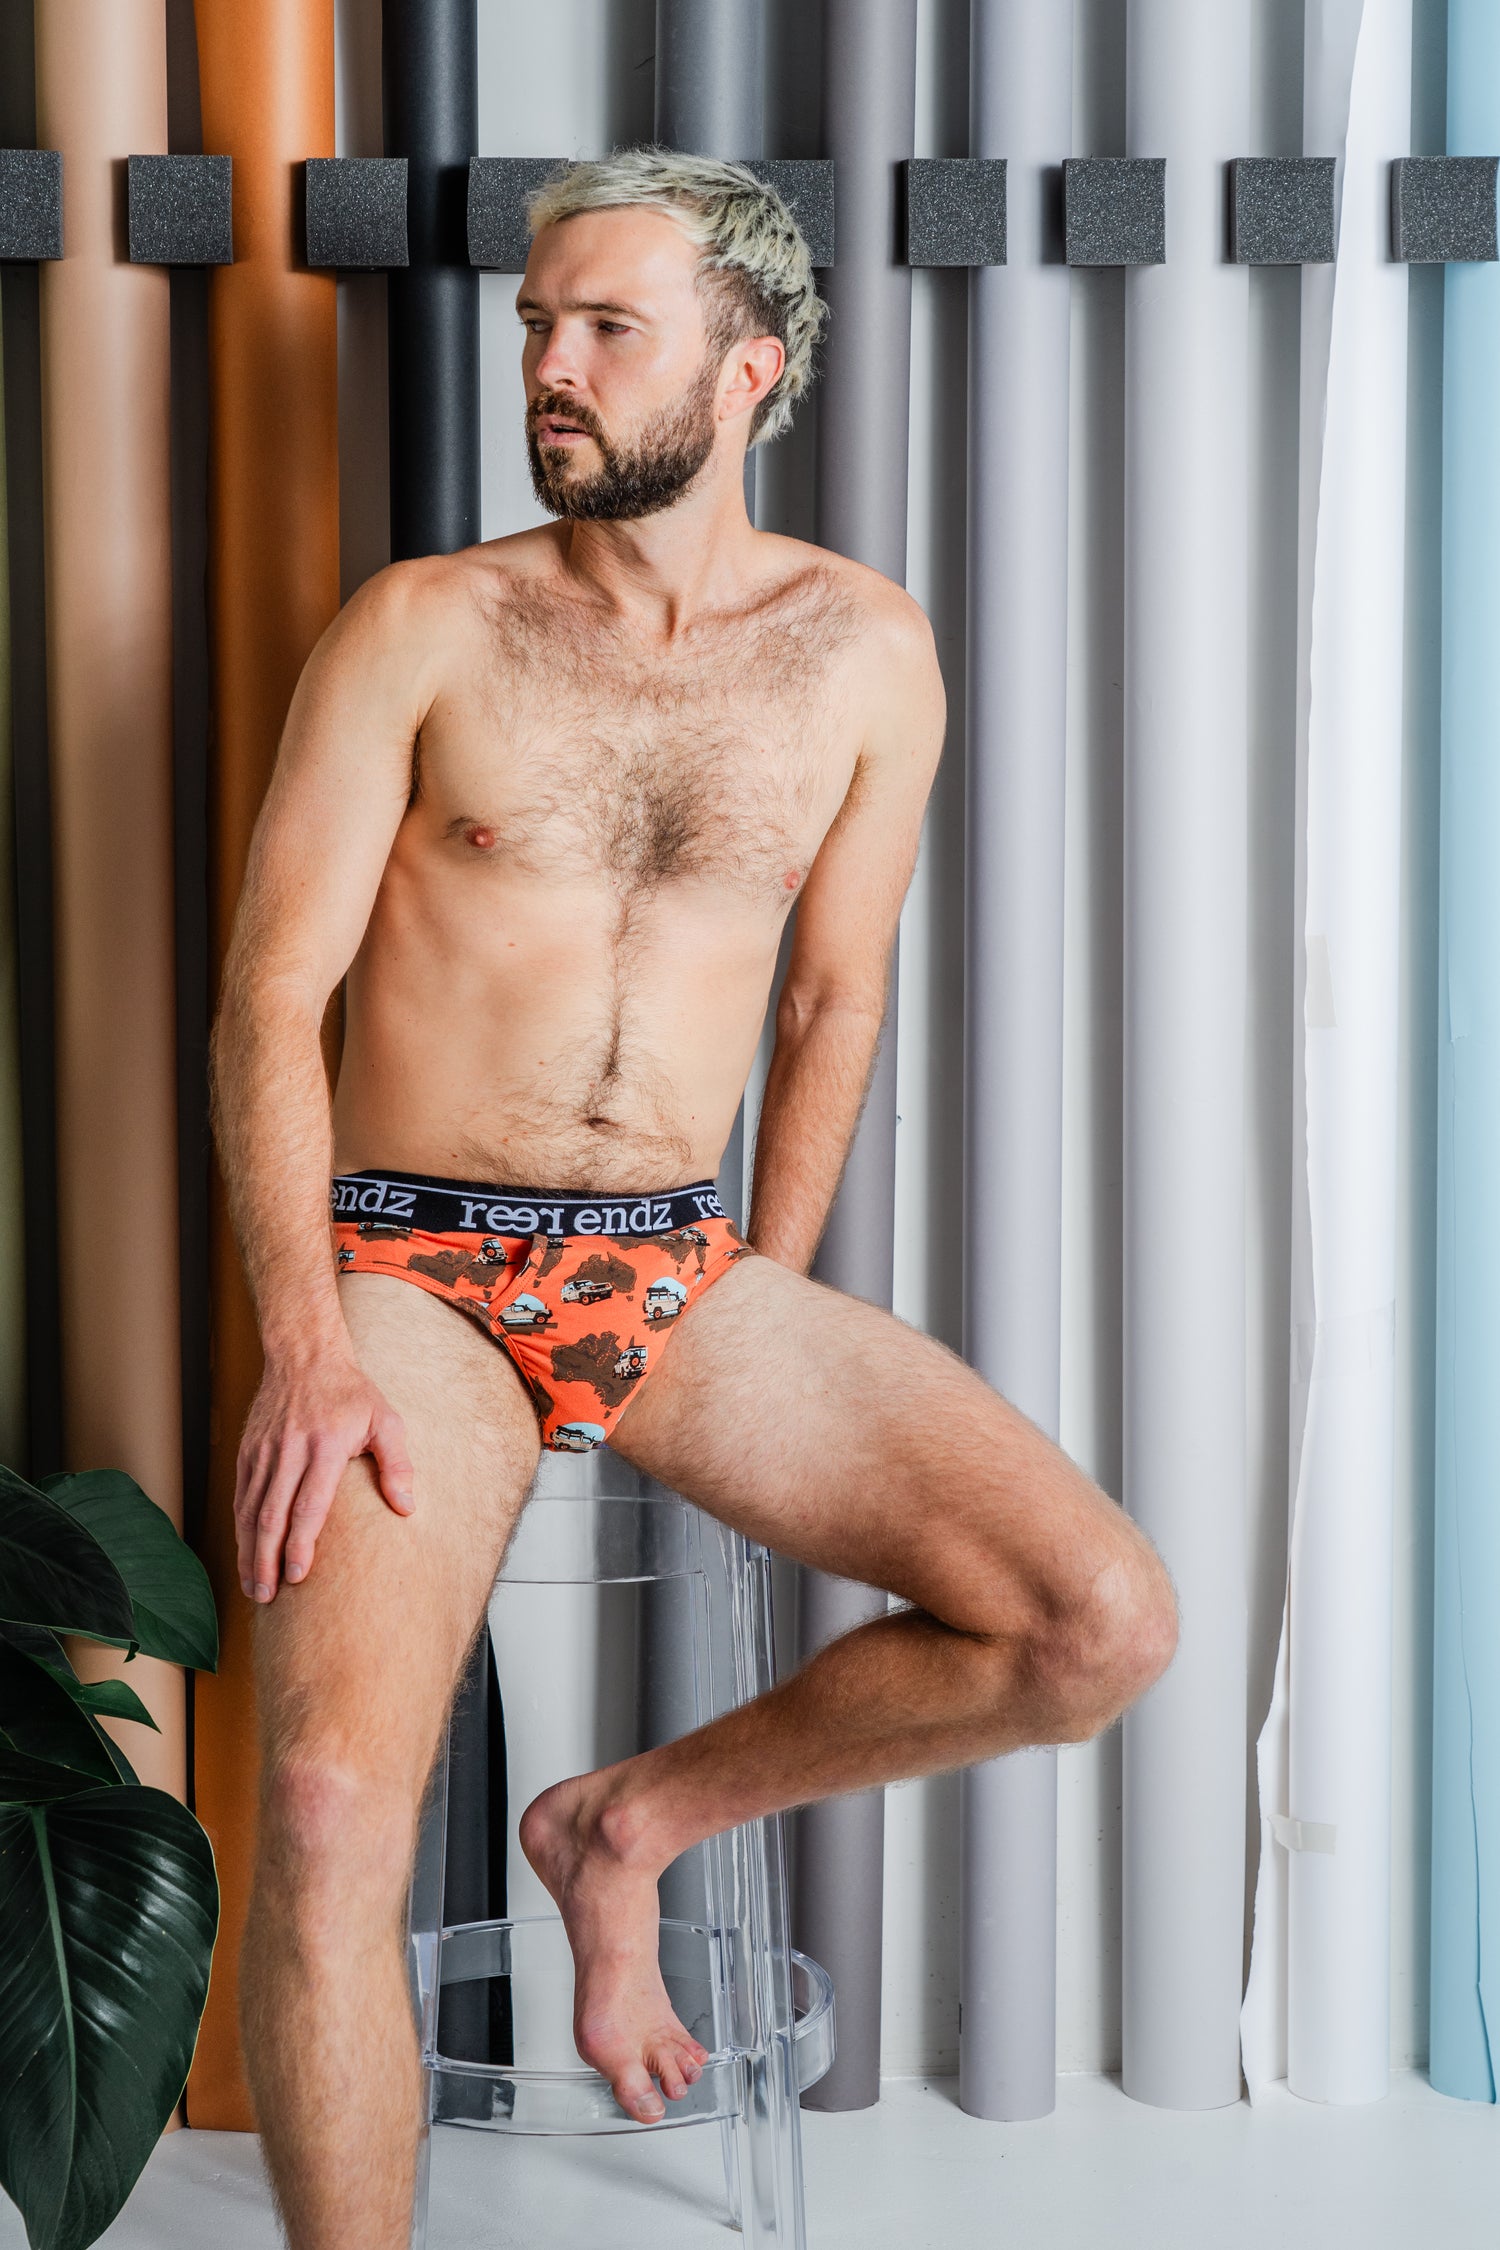 View our male model confidently sporting the 'Cruisin' Organic Cotton Men's Brief – the epitome of sustainable fashion